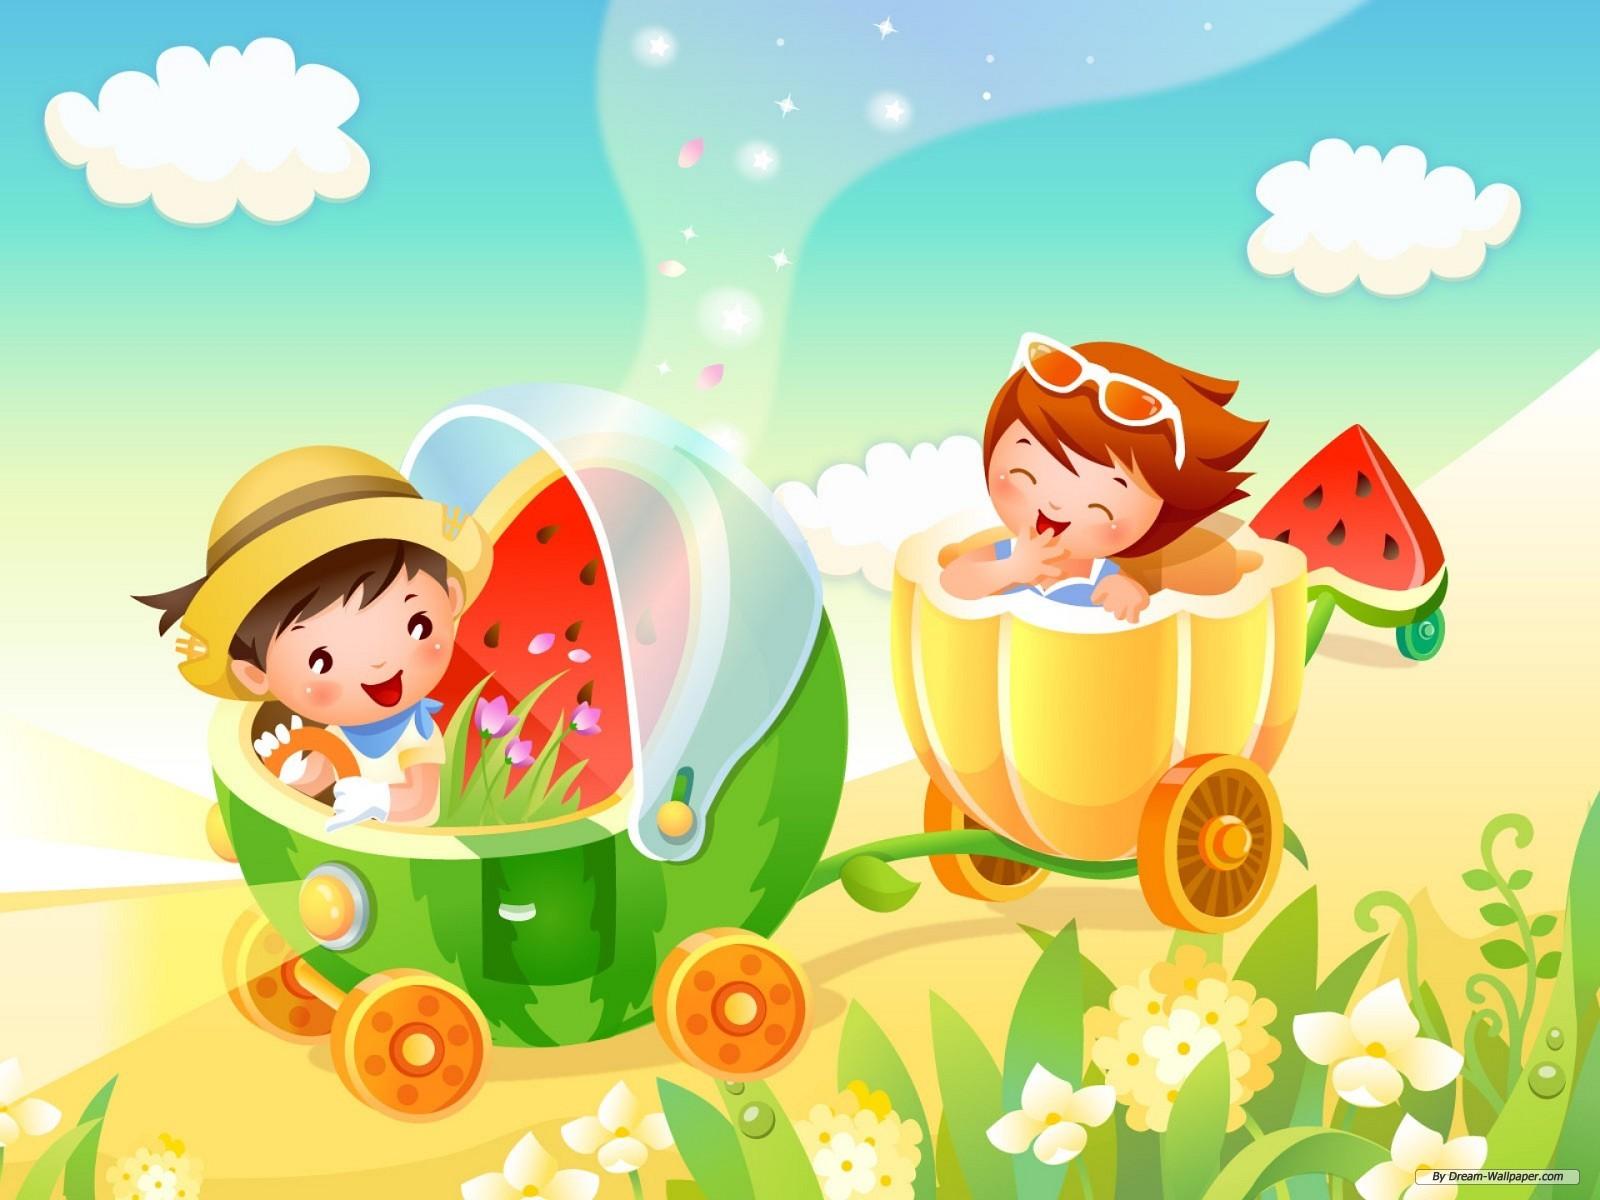 Colorful Cartoon Wallpaper for kids Background in HD For Download